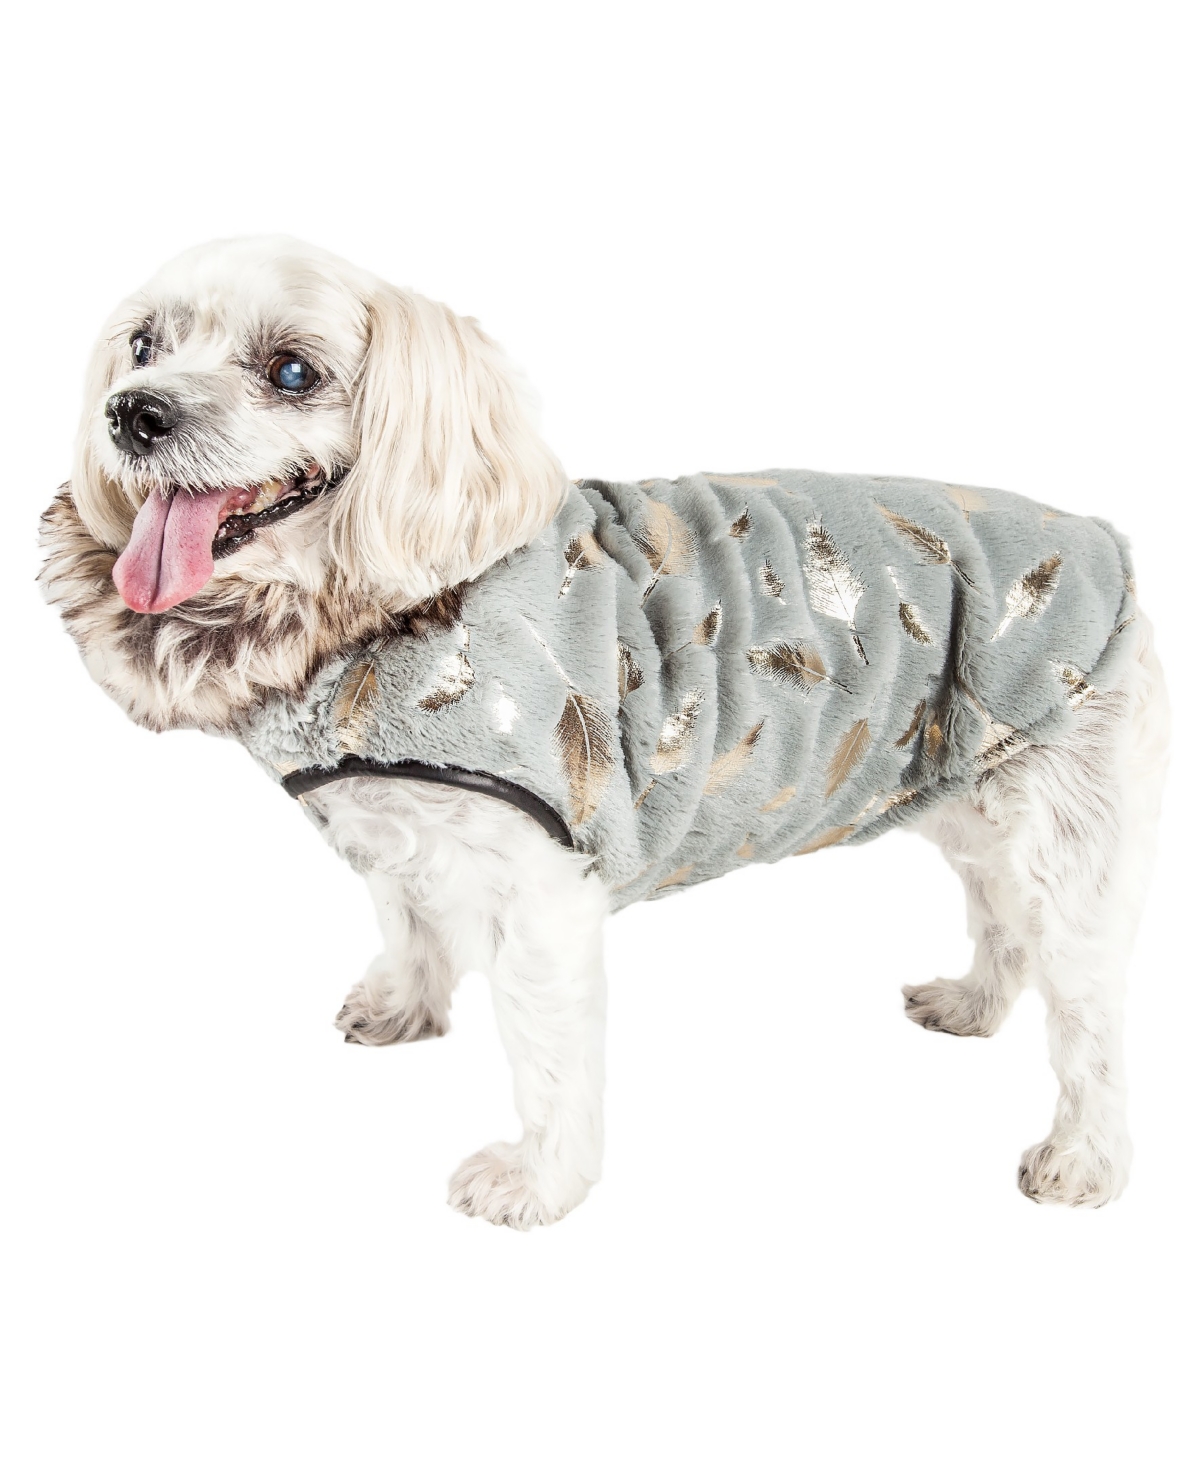 Luxe 'Gold-Wagger' Gold Leaf Fur Dog Jacket Coat - Gray